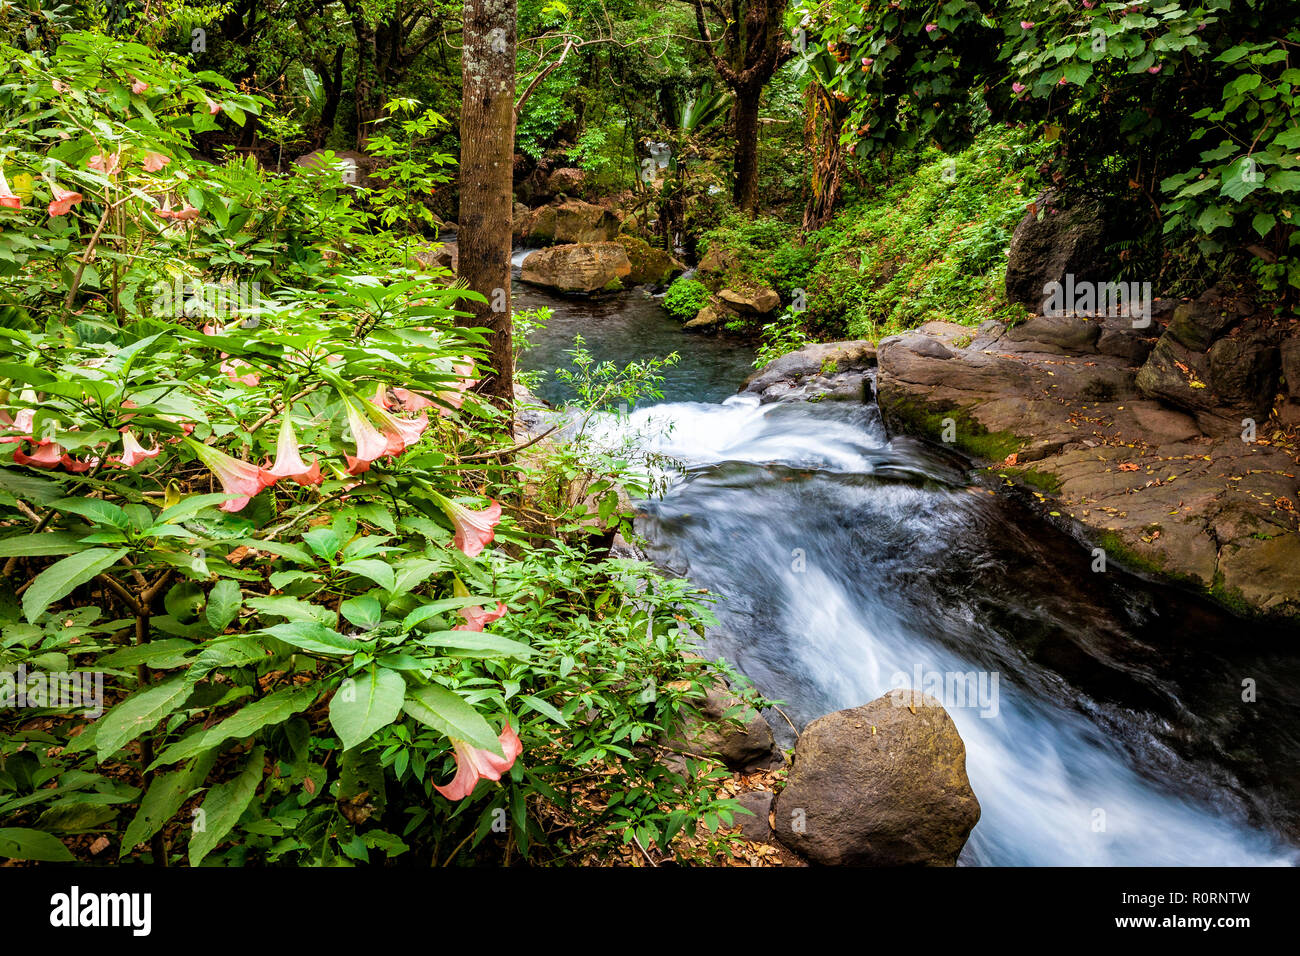 The spring fed Rio Cupatitzio lined with Angel's Trumpet flowers in the National Park, Uruapan, Michoacan, Mexico. Stock Photo